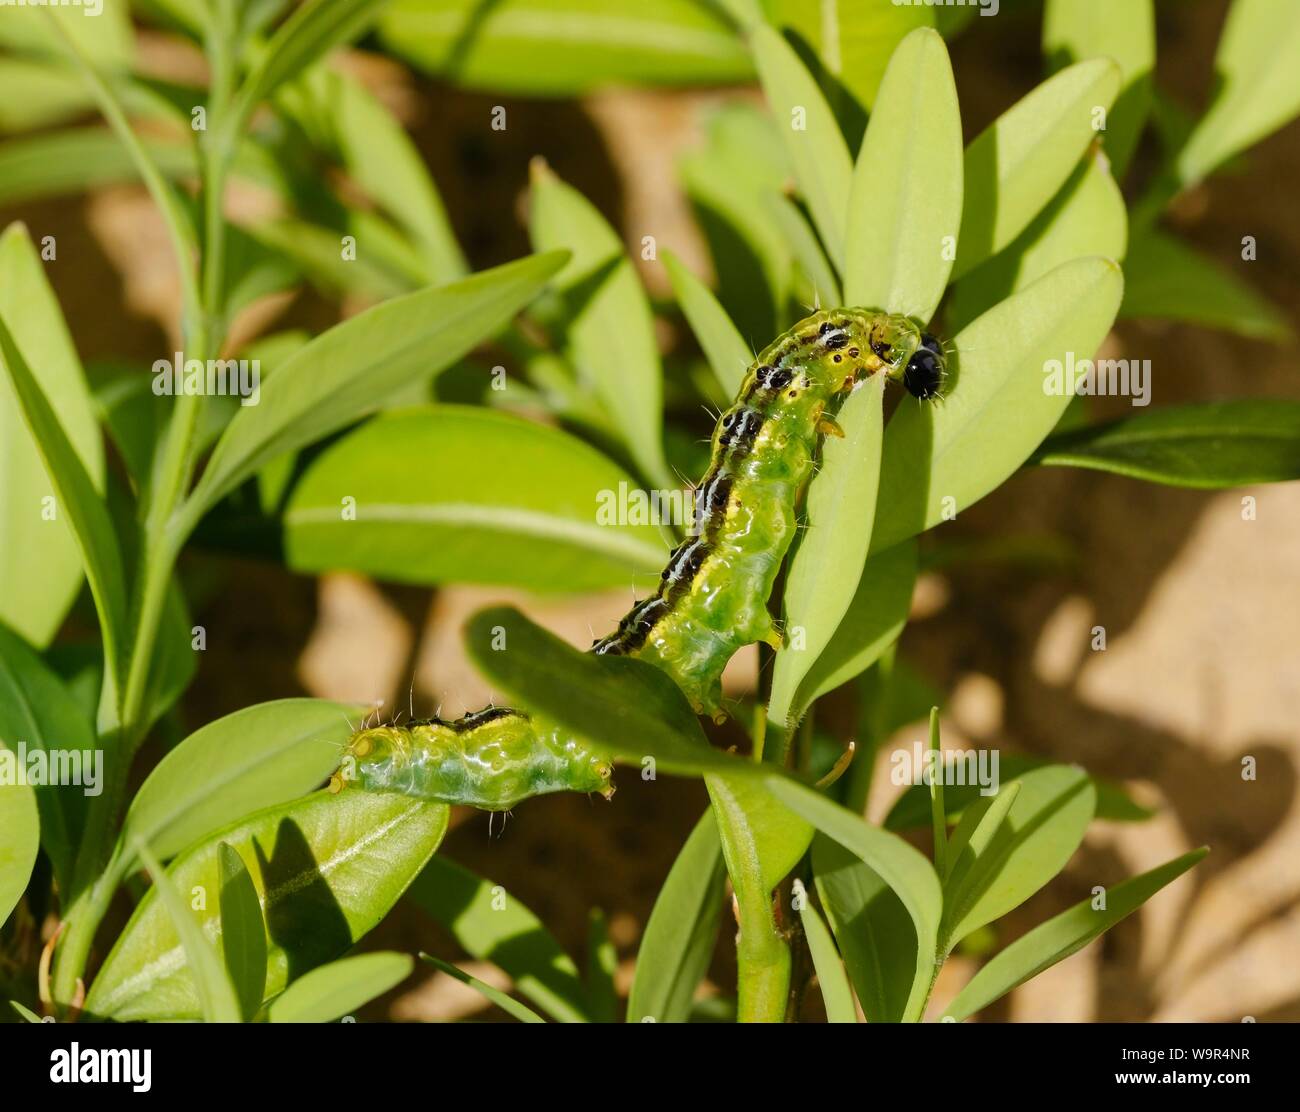 Caterpillar of box tree moth (Cydalima perspectalis), eats leaves of Common box (Buxus sempervirens), Germany Stock Photo